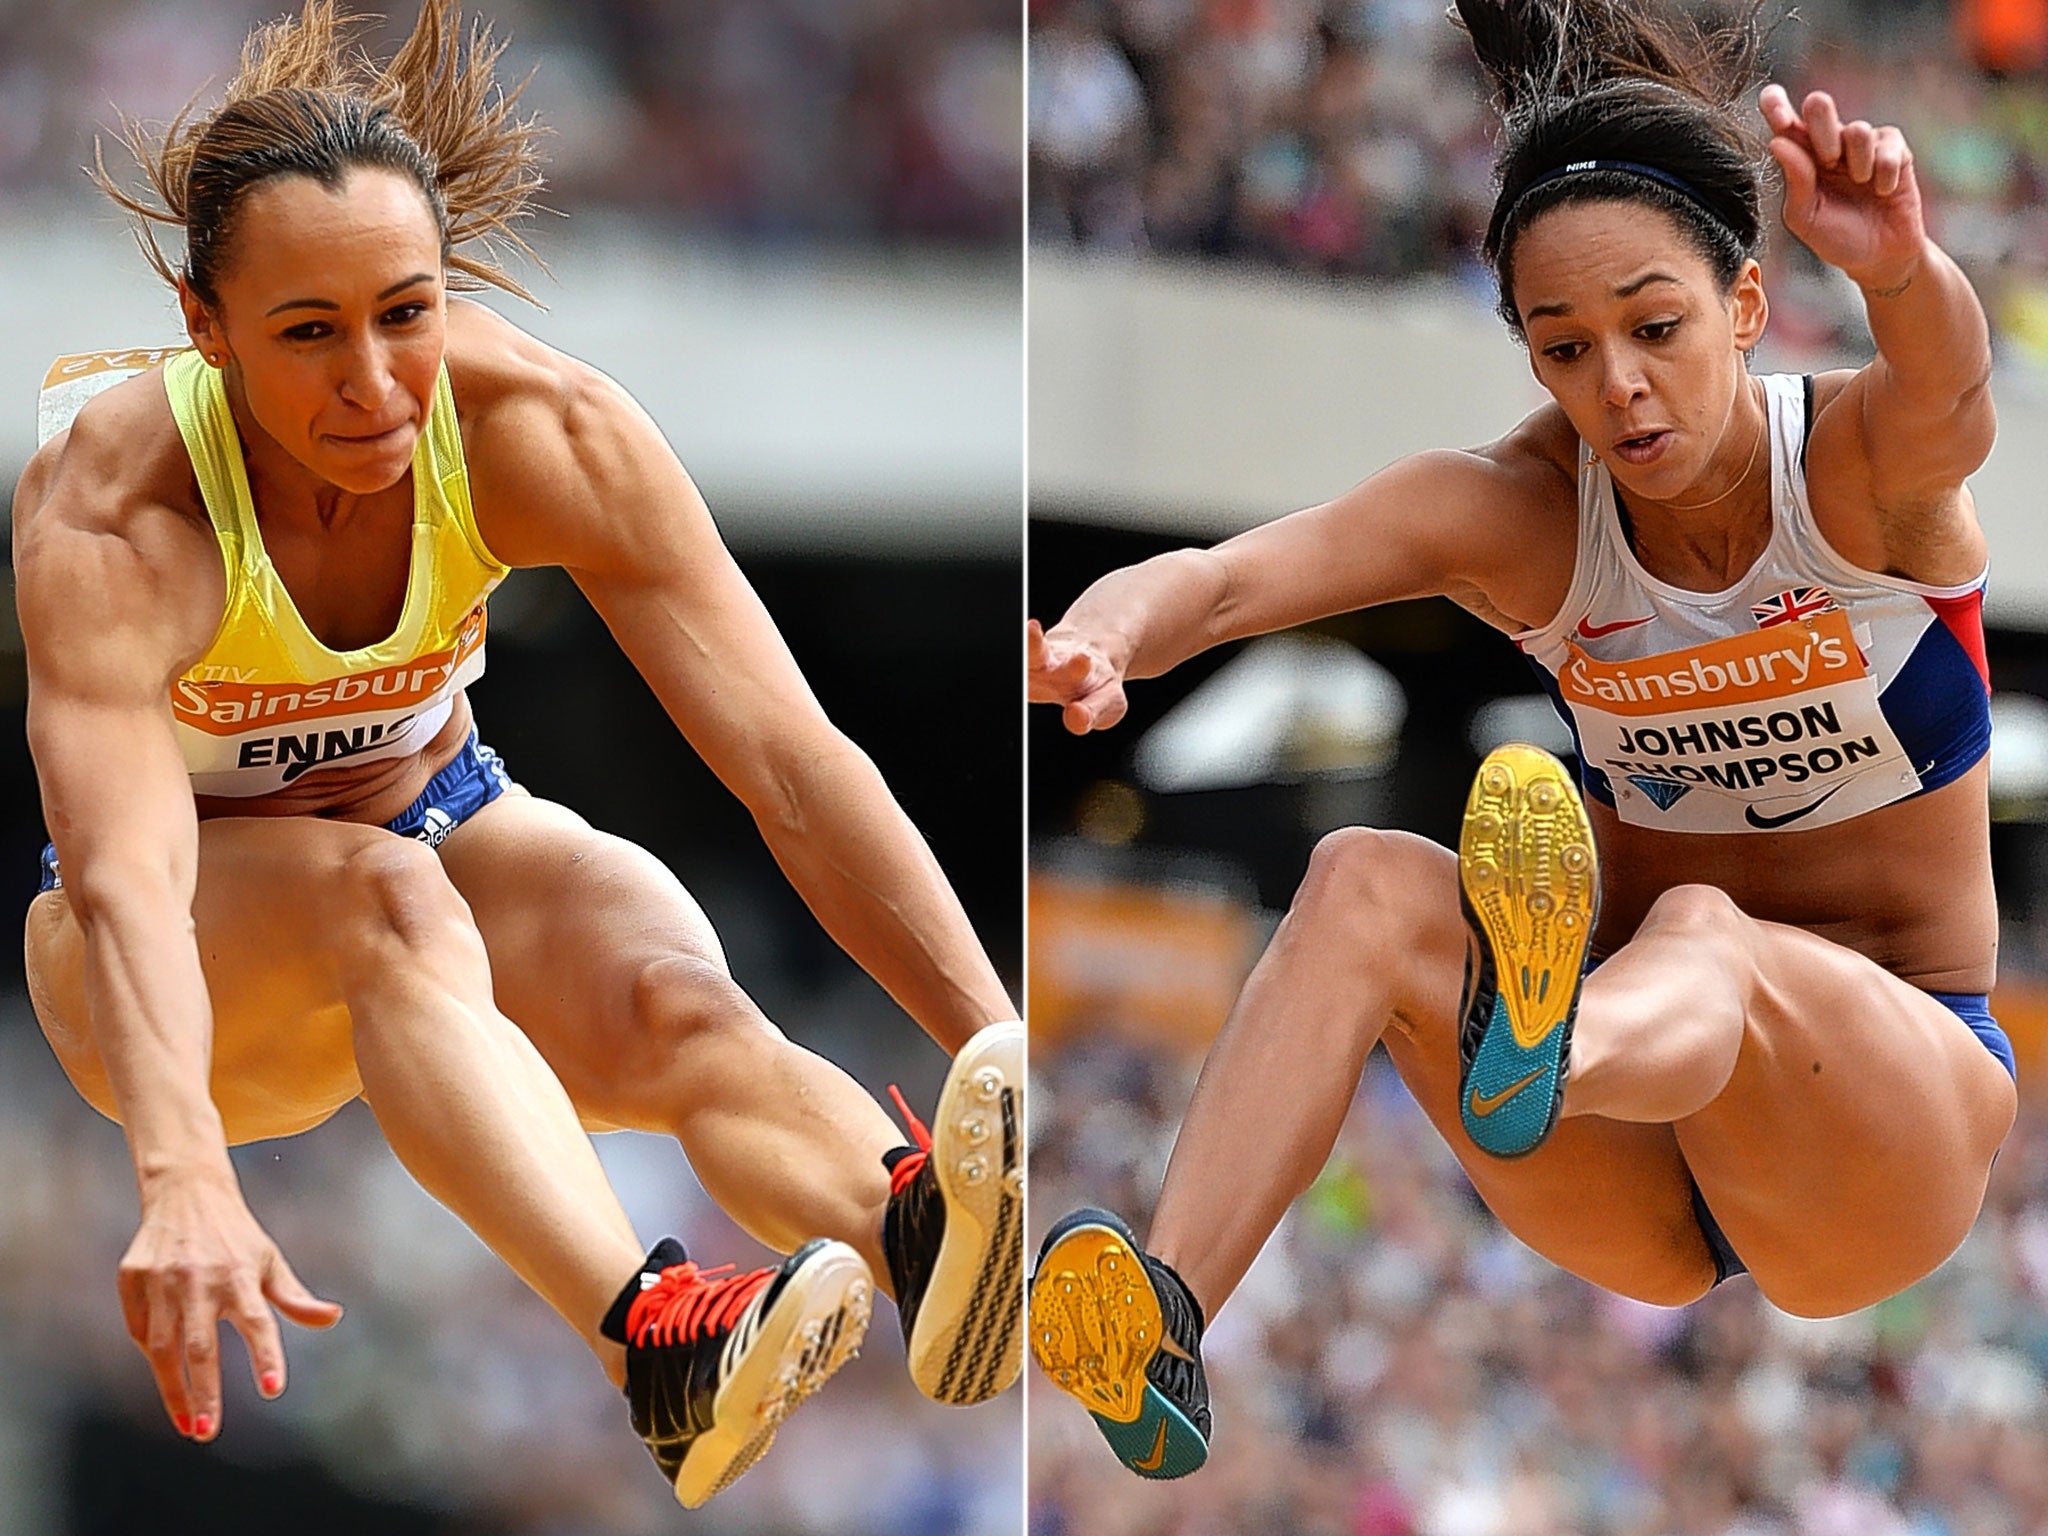 Heptathletes Jessica Ennis-Hill and Katarina Johnson-Thompson compete in the long jump